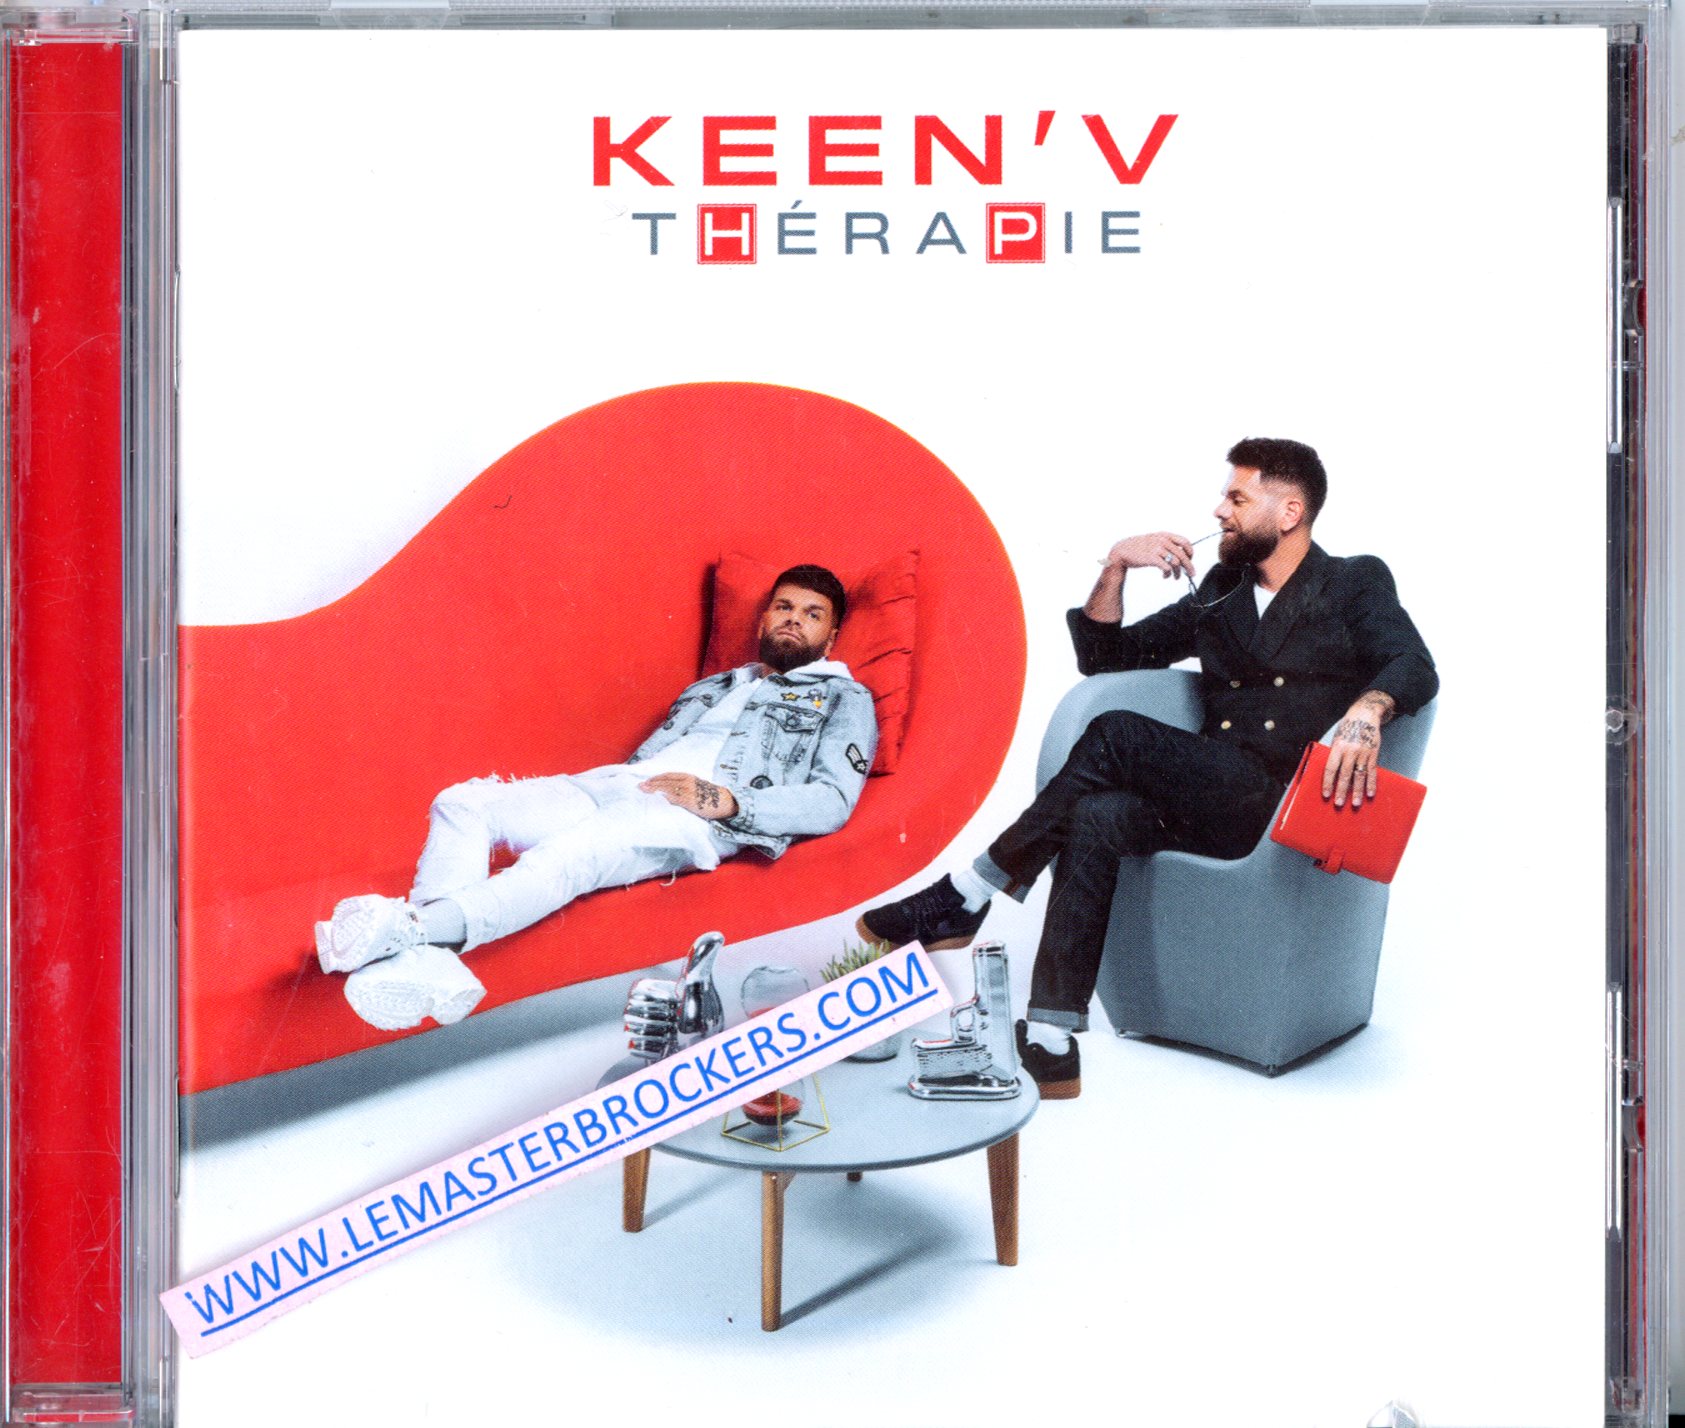 KEEN'V THERAPIE - 0190295486464